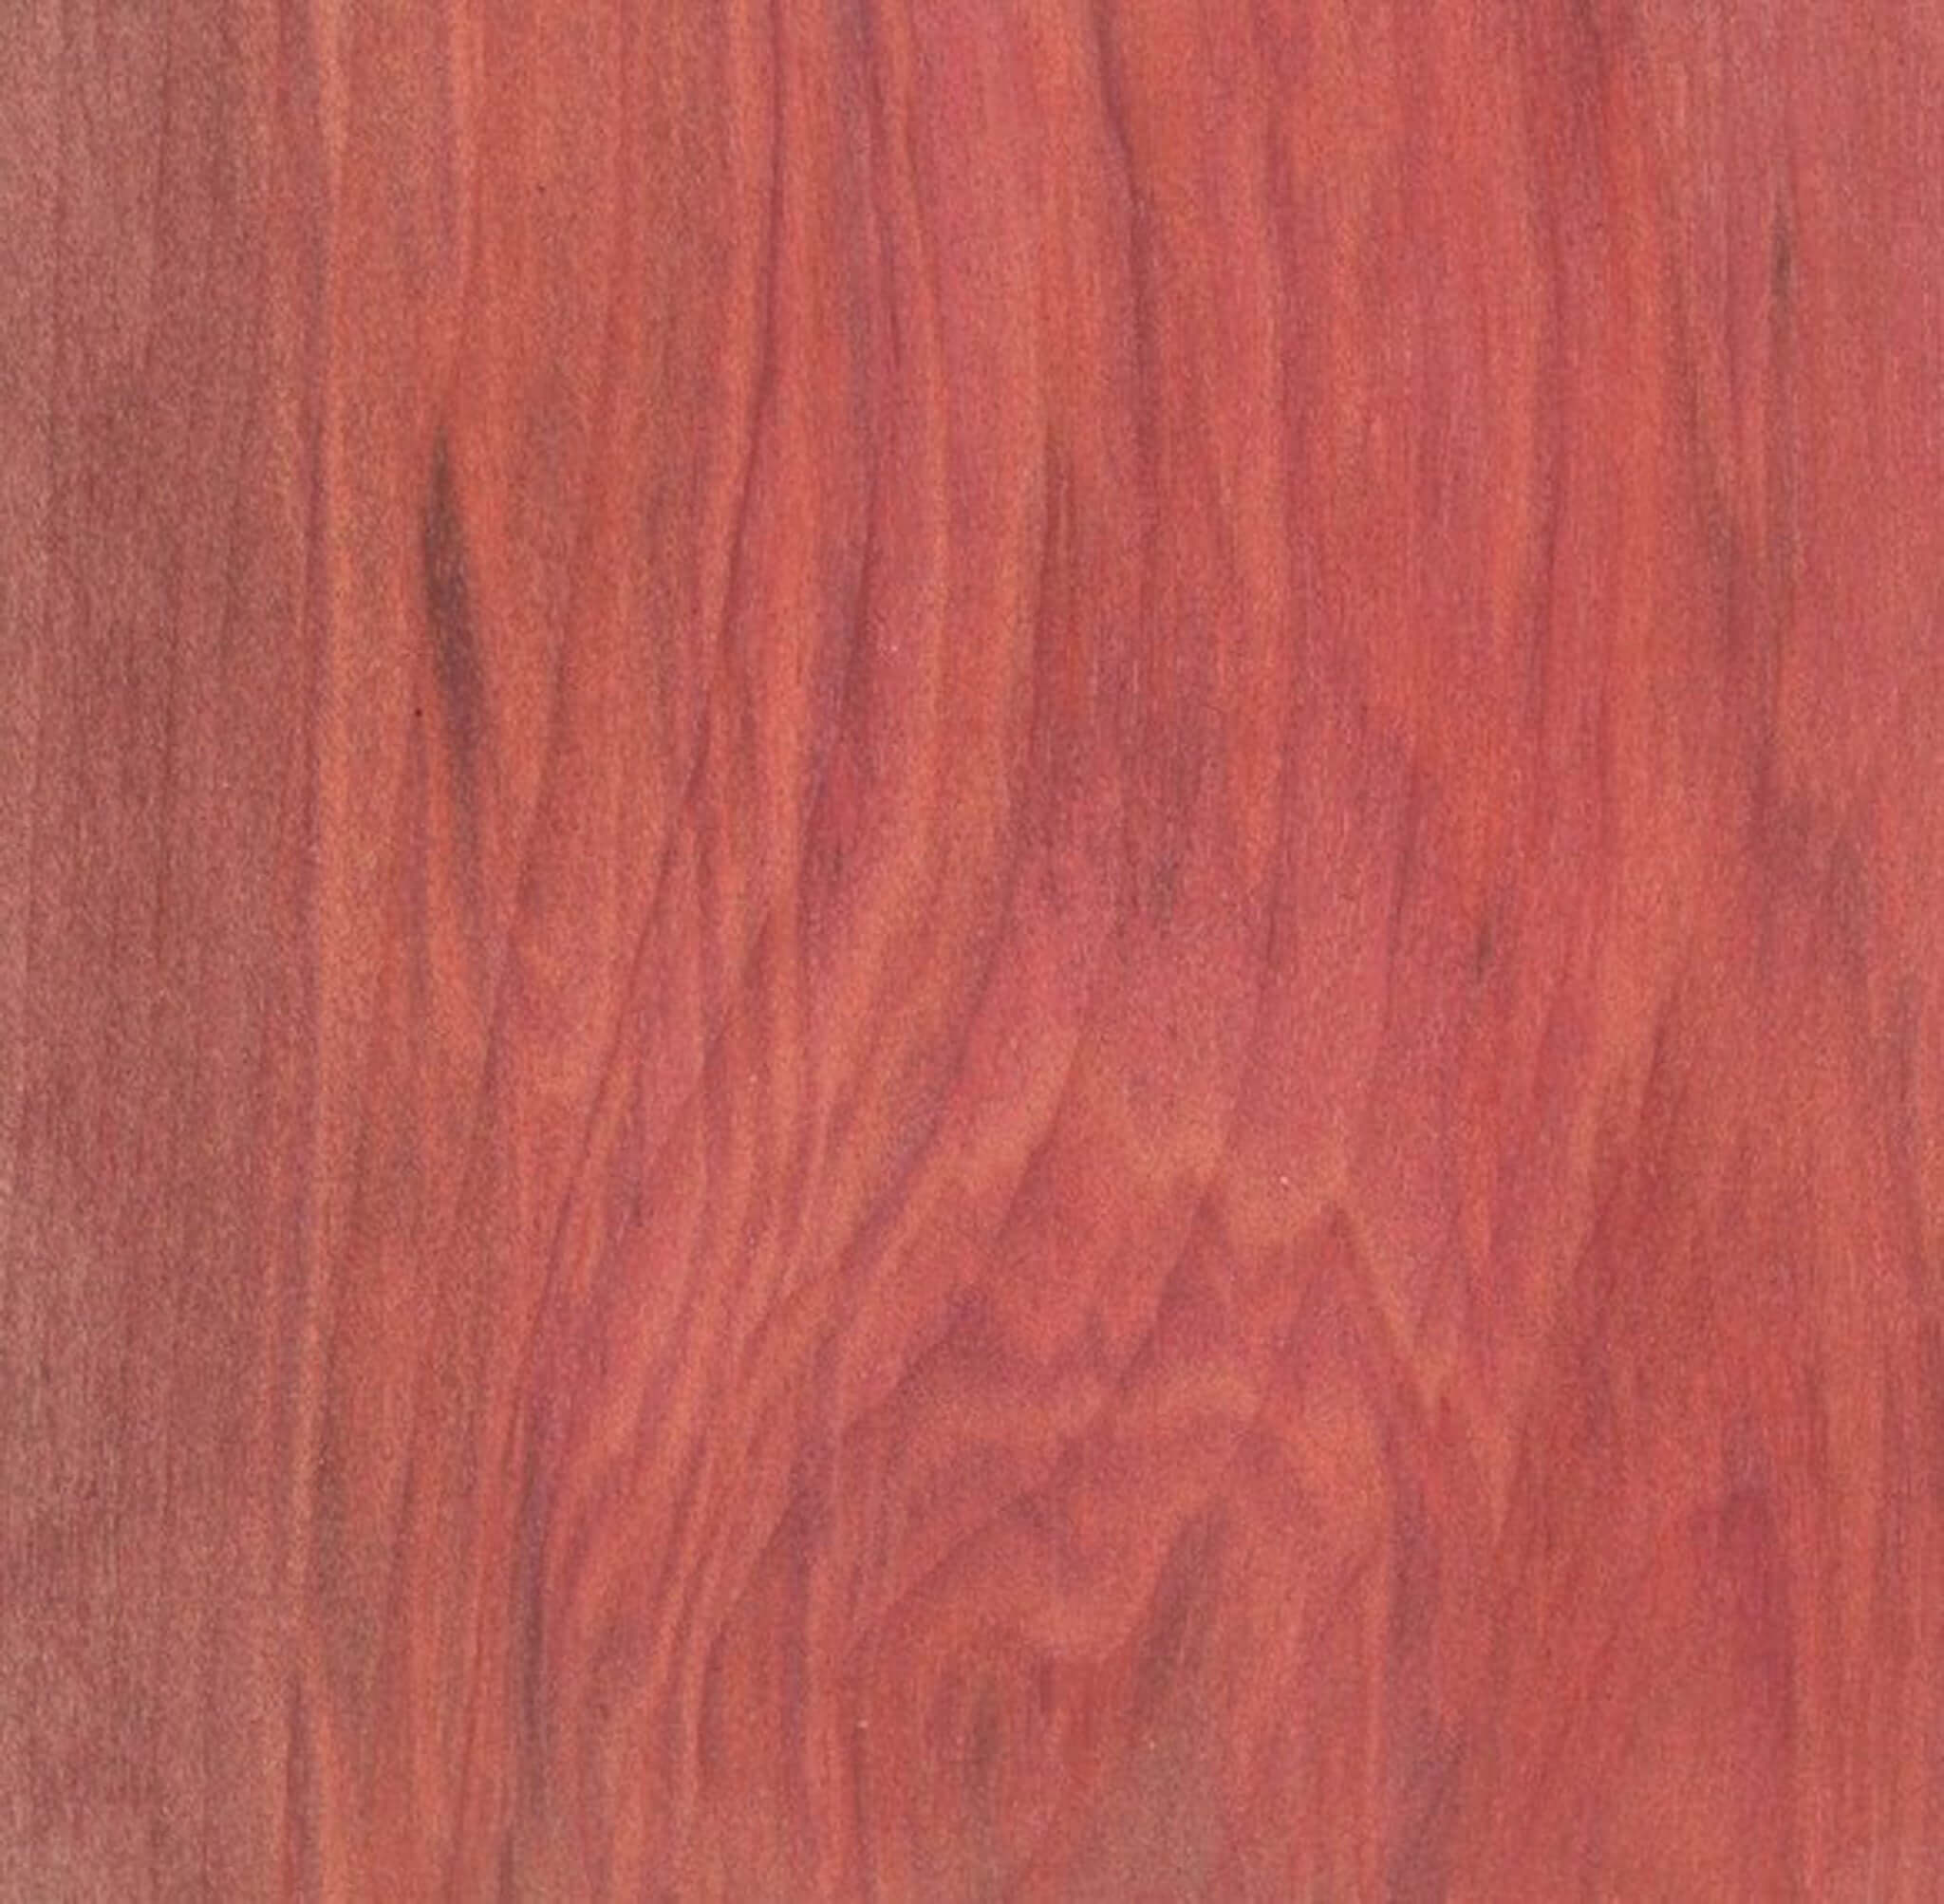 a sample of redheart wood